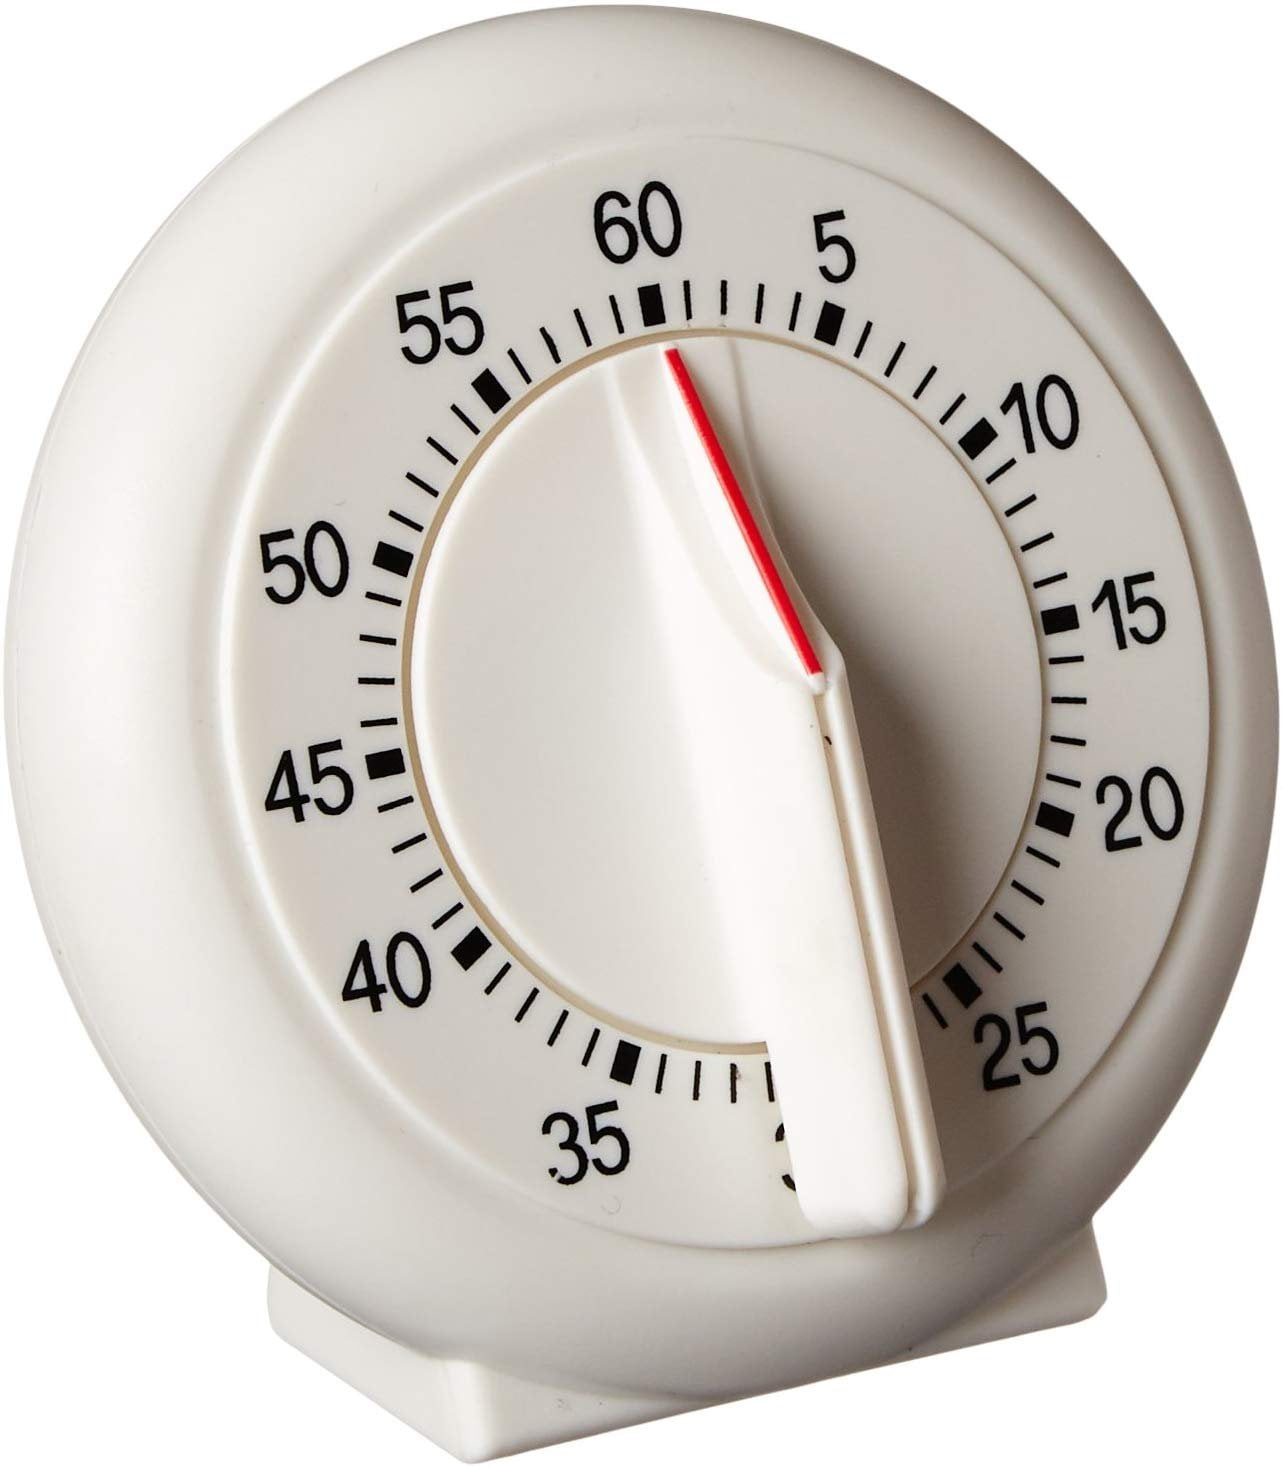 LinTimes Kitchen Cooking Timer Tomato